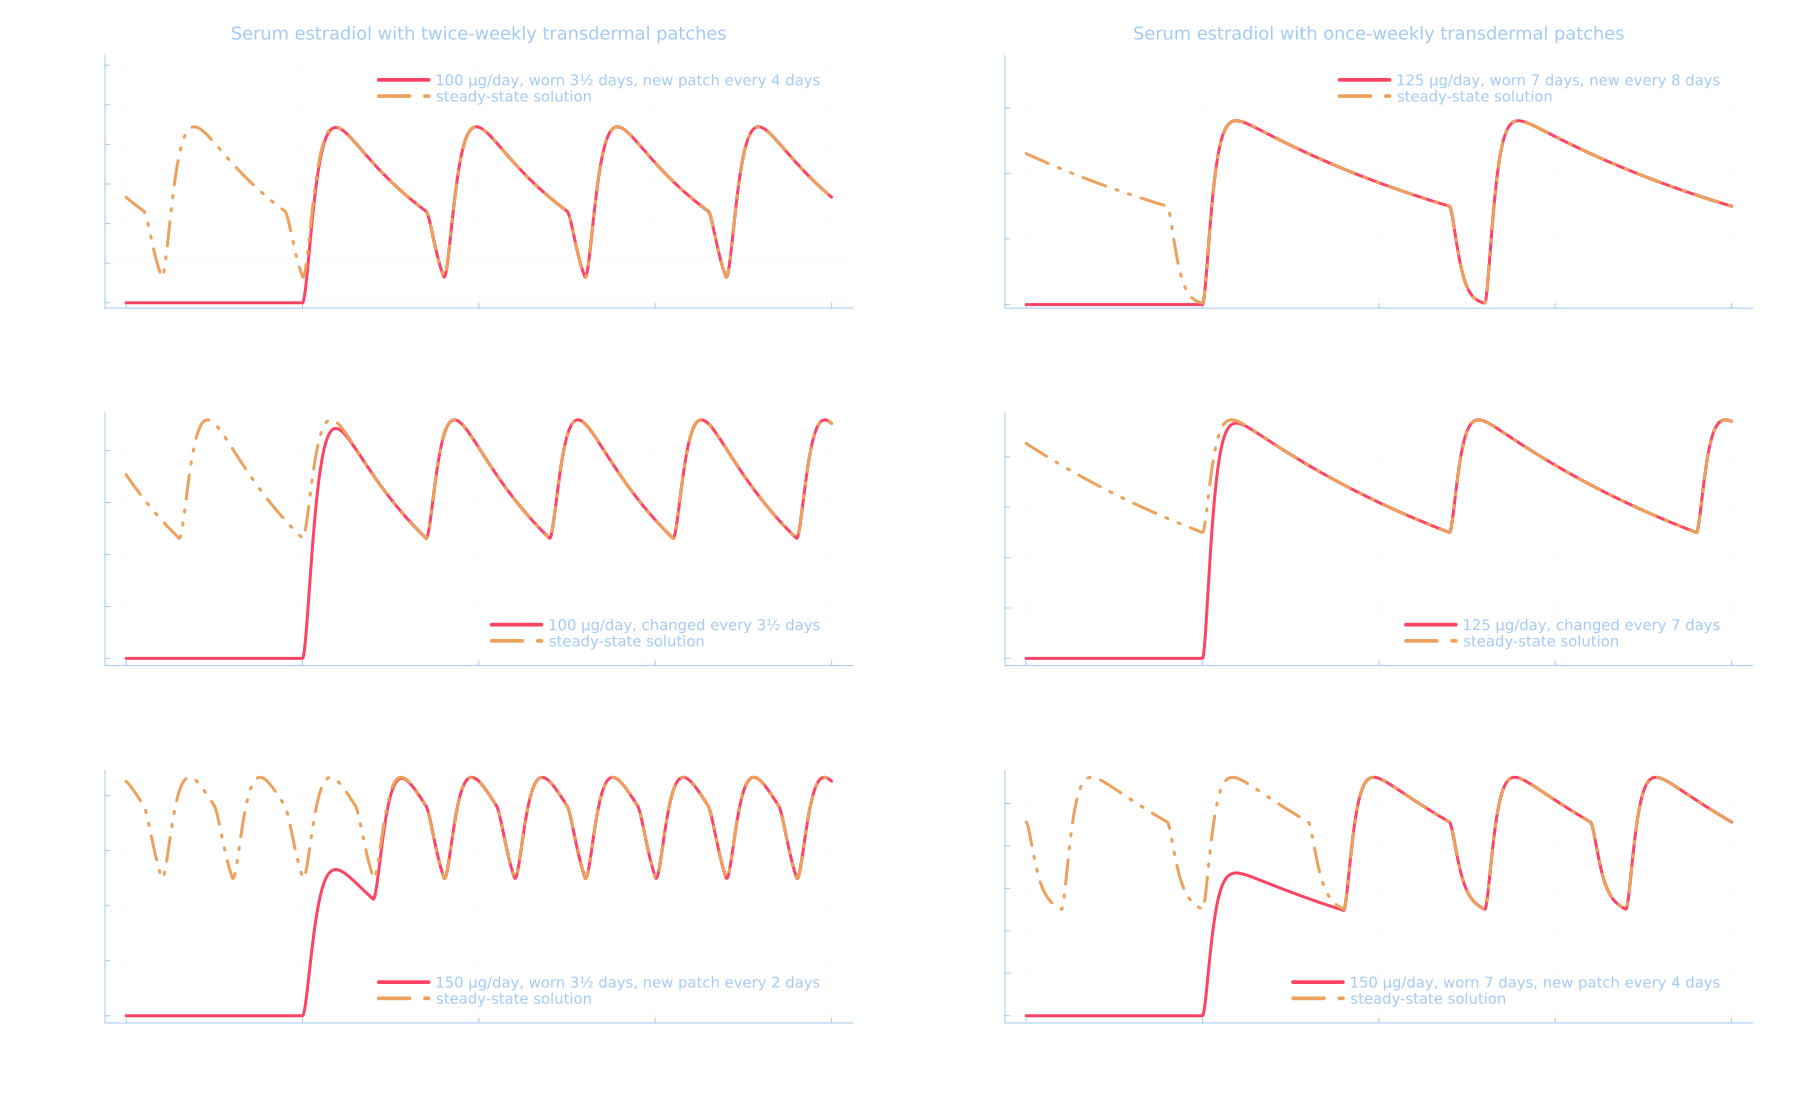 Comparison of the steady-state and normal solutions for patches